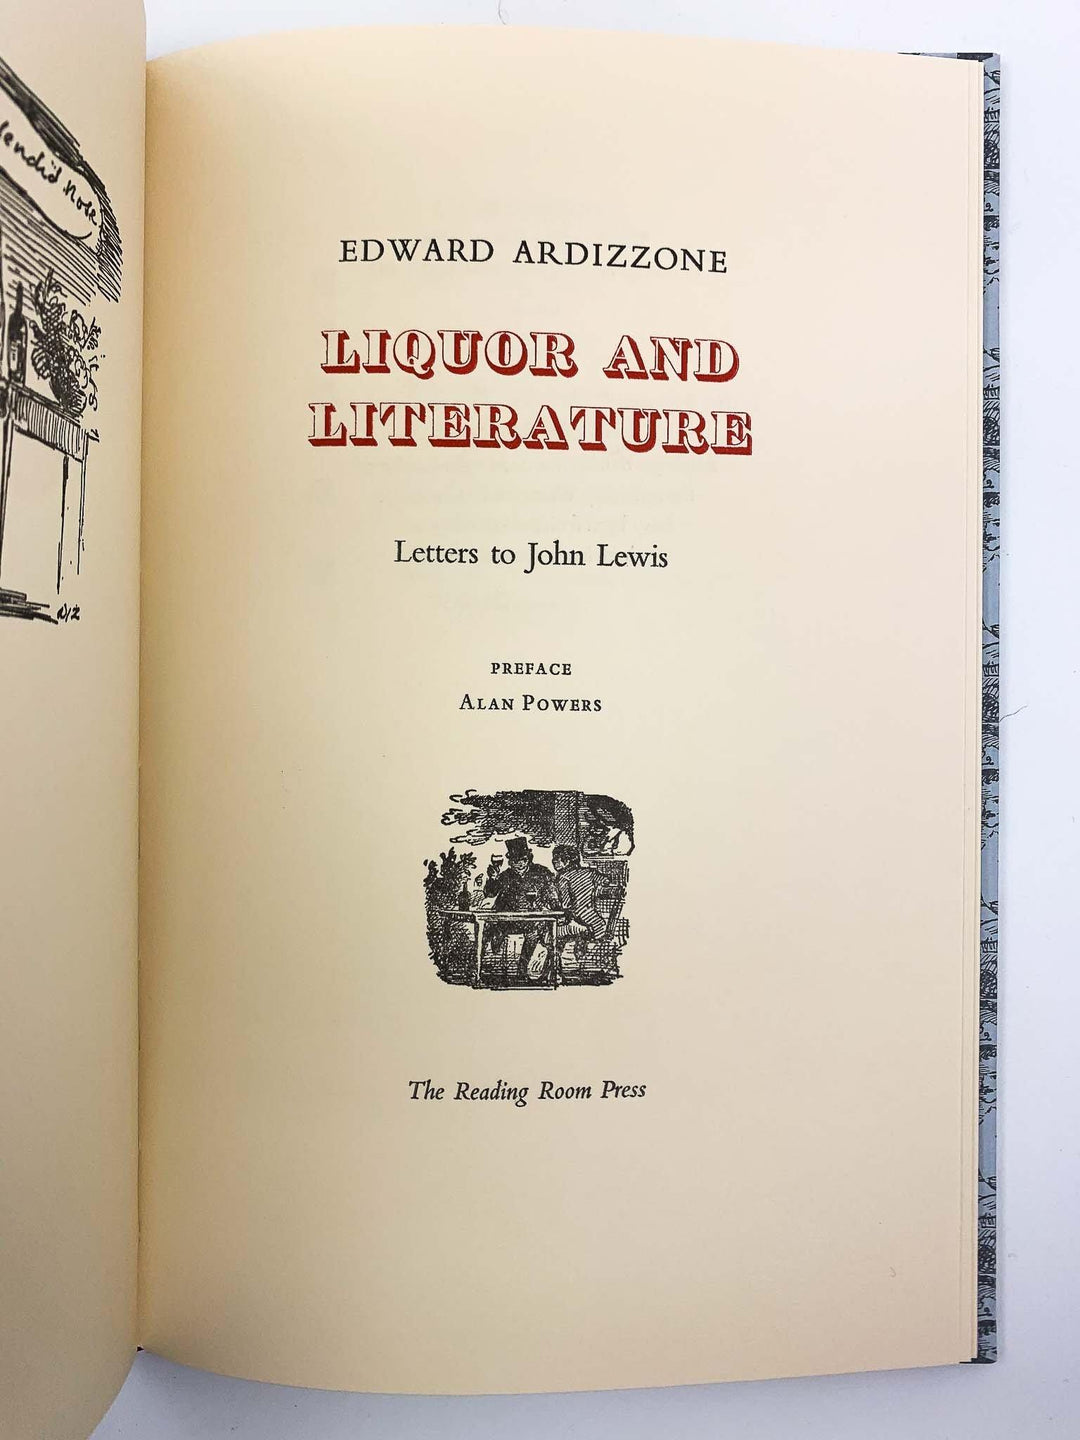 Ardizzone, Edward - Liquor and Literature | pages